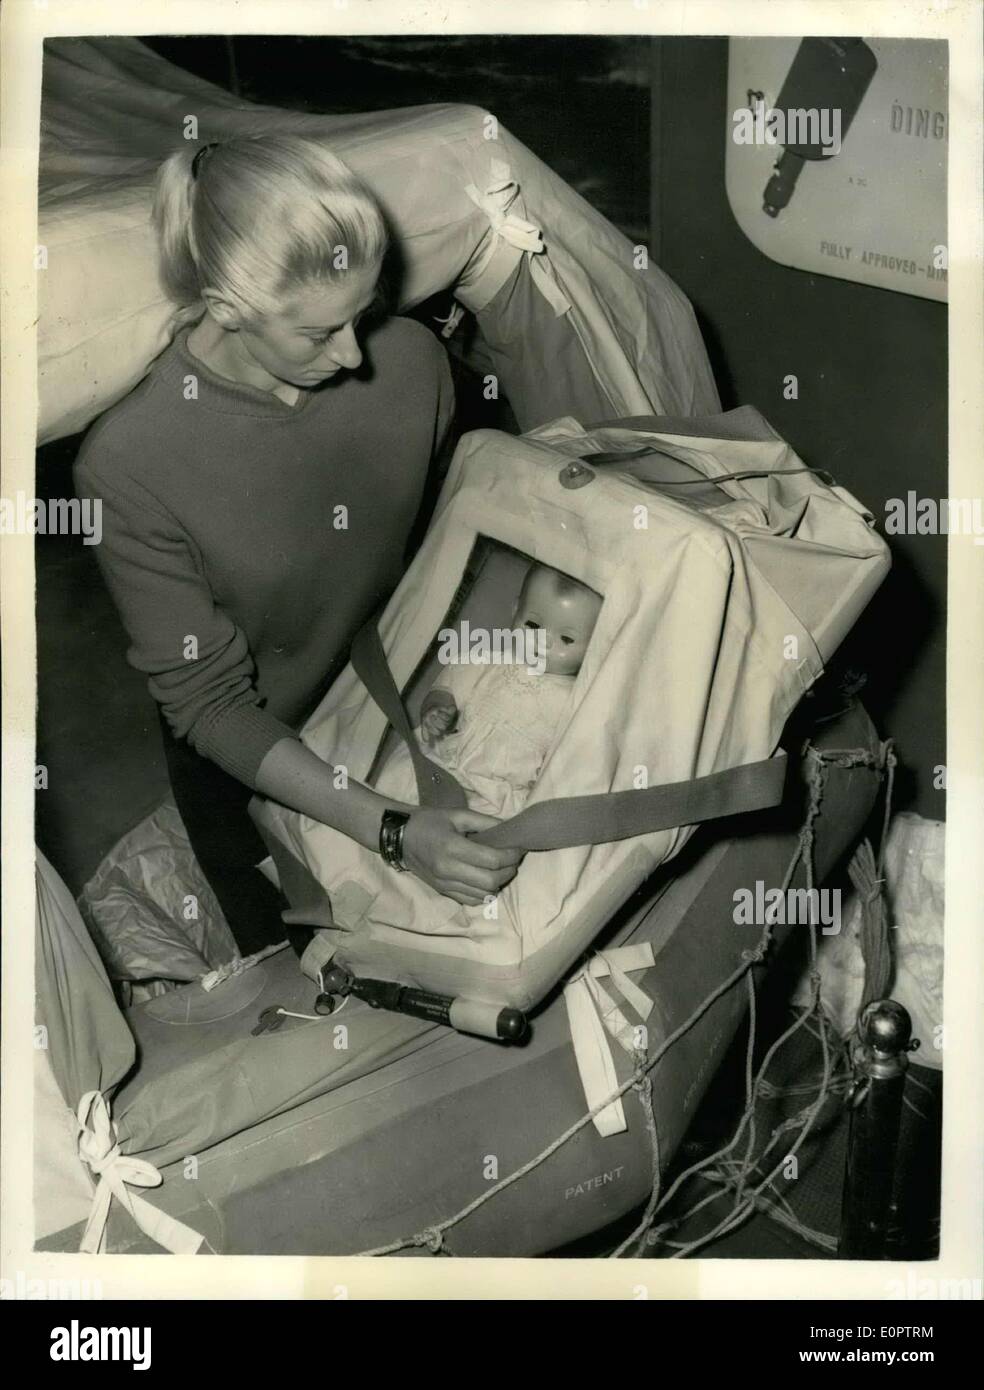 Dec. 31, 1956 - Preparing Fort The National Boat Show: Photo Shows Marie Dunsmore, of New Zealand, demonstrates the Baby's Floating Survival Cot - at Olympia today, where the National Boat on tomorrow. The Cots a life saving device for airlines. Ships and boats, is a completely closed in cot which, with its self-erecting hoof and canopy, not only provides flotation, but also protection from waves, spray, rain, wind and exposure. The baby, wrapped in the usual blanket, may be tied down inside the cot with two bands of fabric before an aircraft ditches Stock Photo